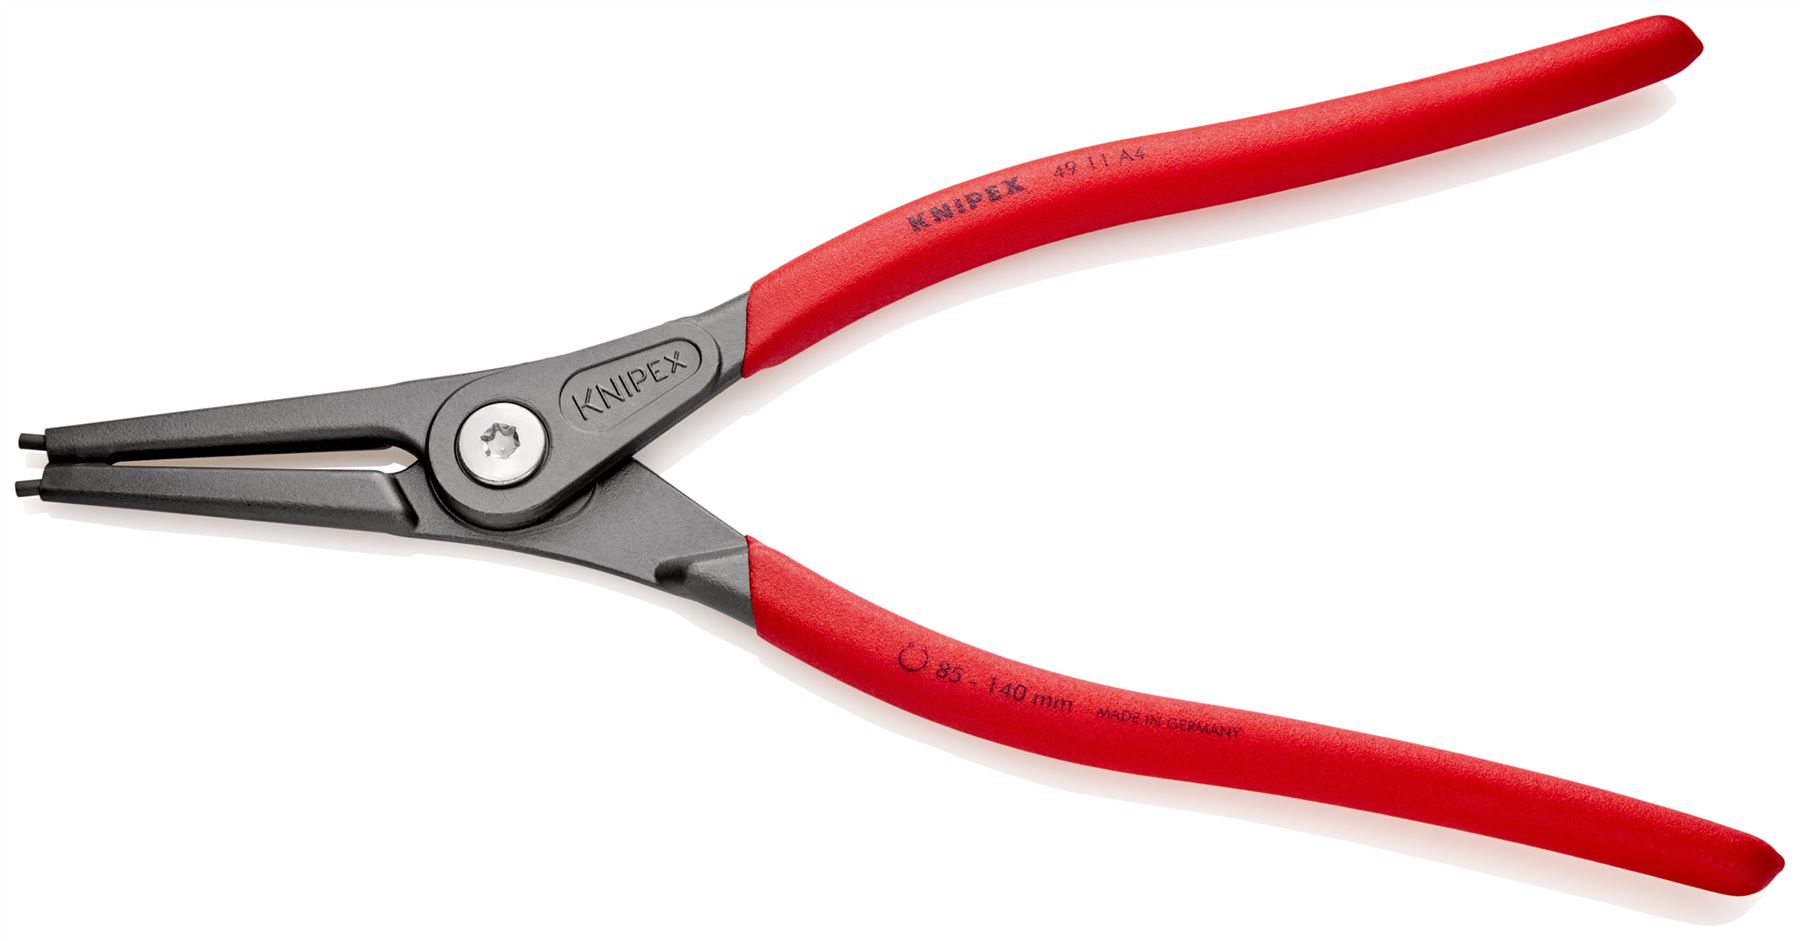 KNIPEX Precision Circlip Pliers for External Circlips on Shafts 320mm 3.2mm Diameter Tips 49 11 A4